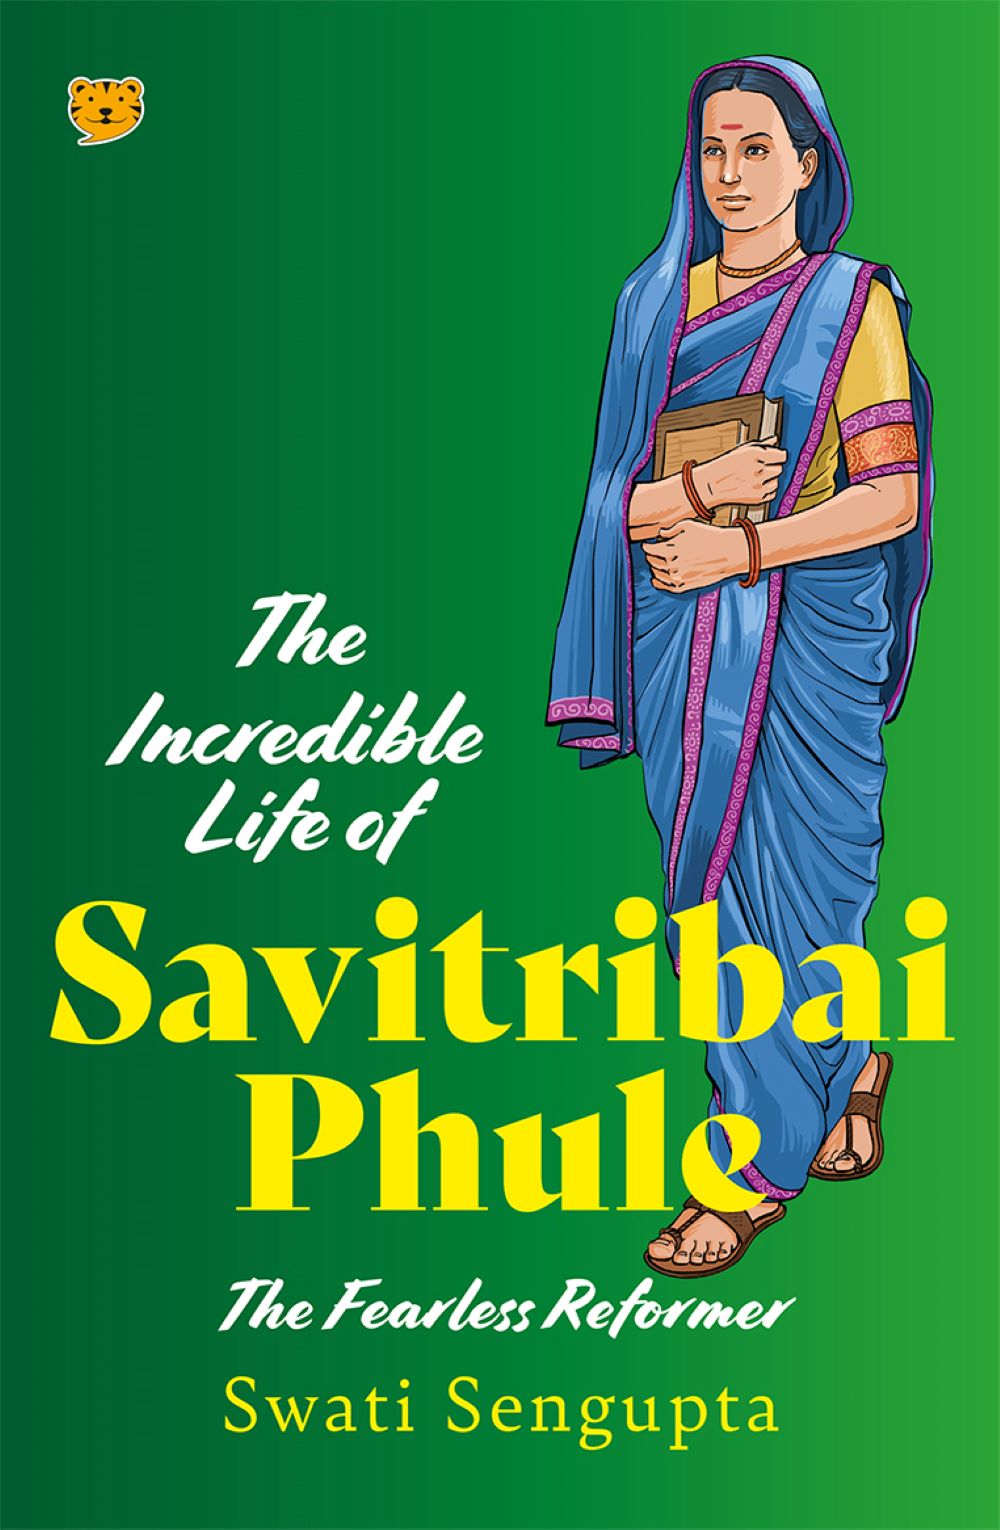 Review: The Incredible Life Of Savitribai Phule: The Fearless Reformer